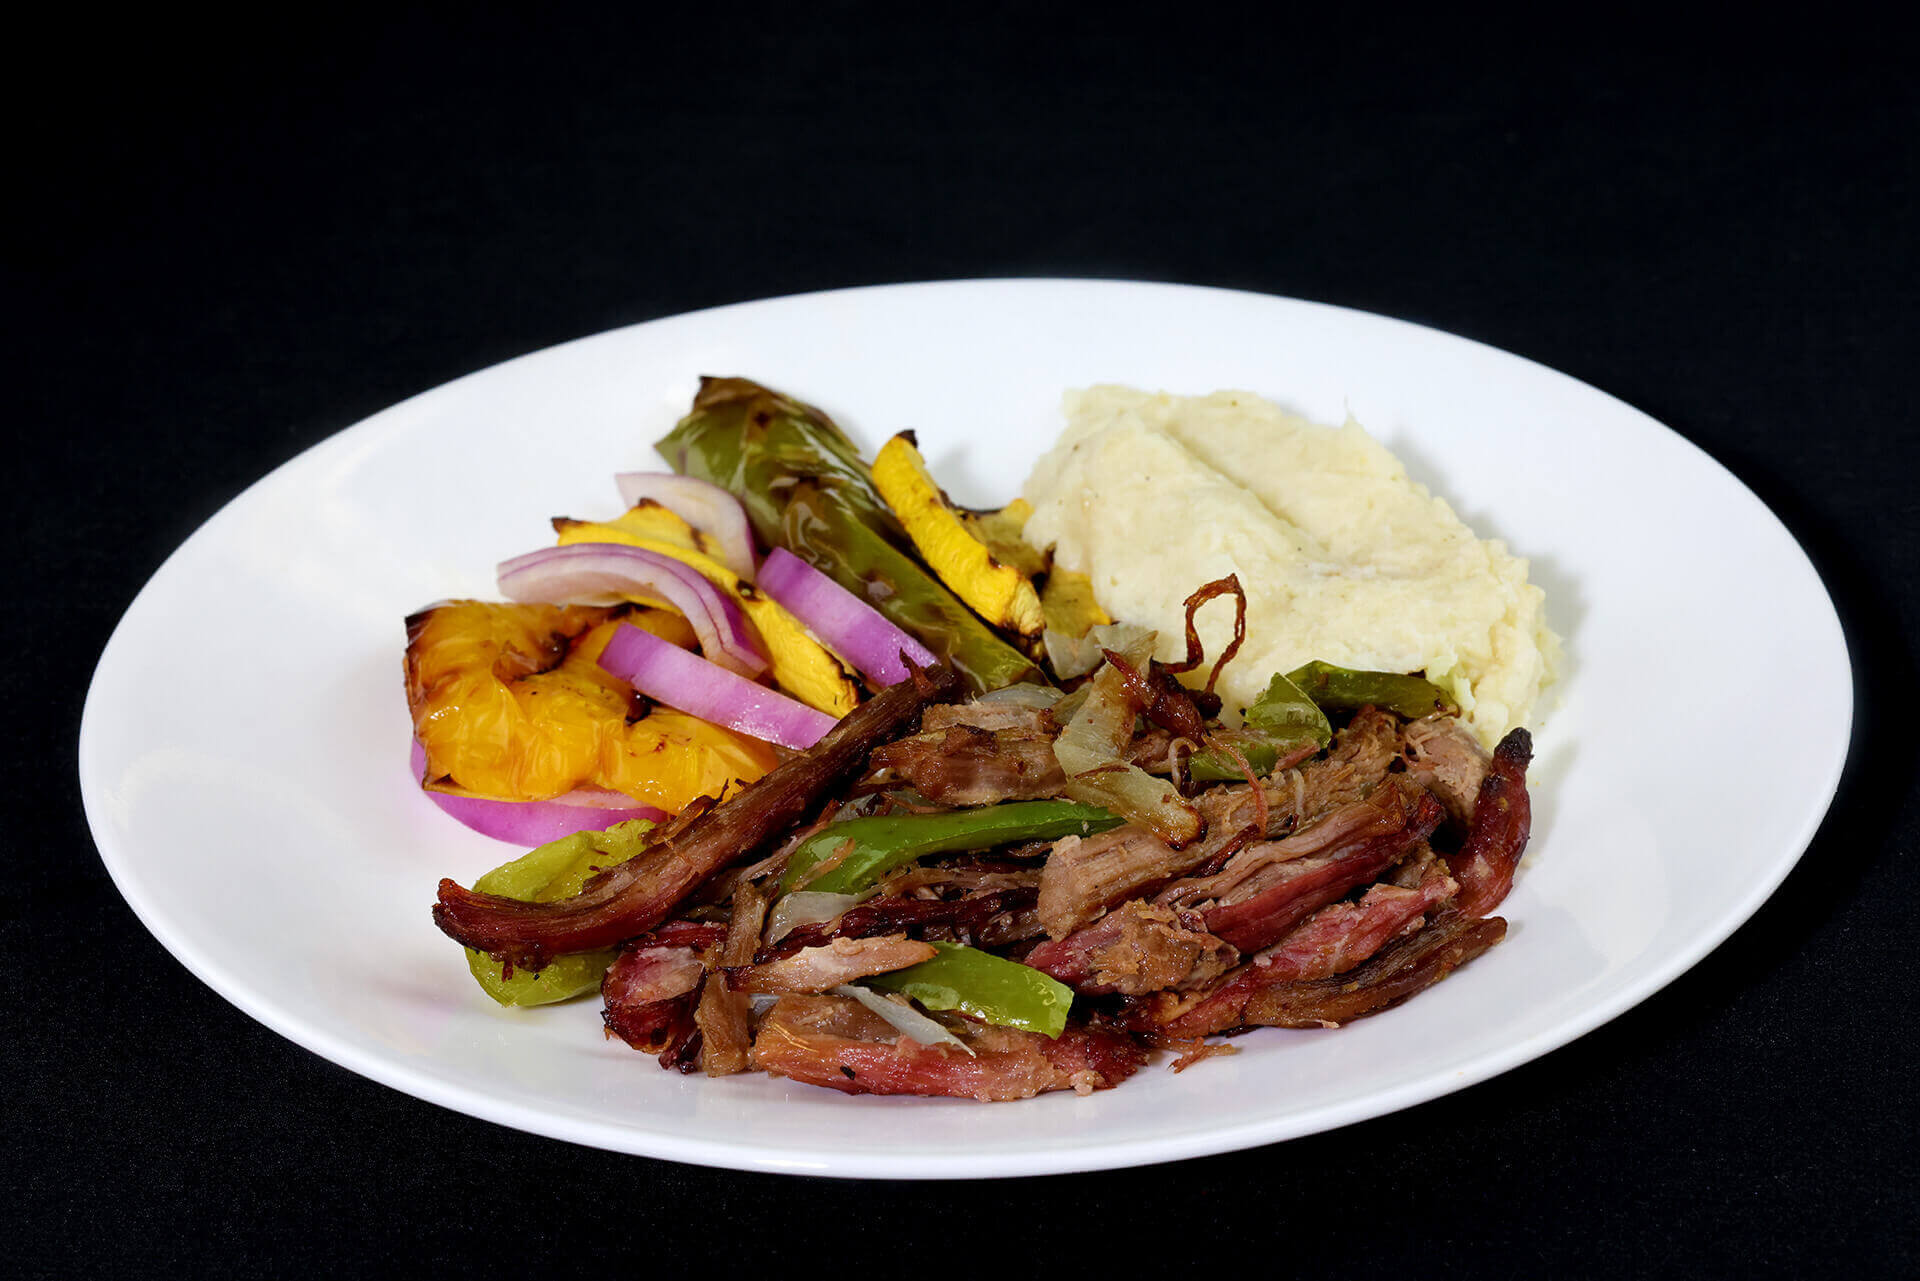 Paleo pulled steak with cauliflower mash, bell peppers, onions, and parsley.